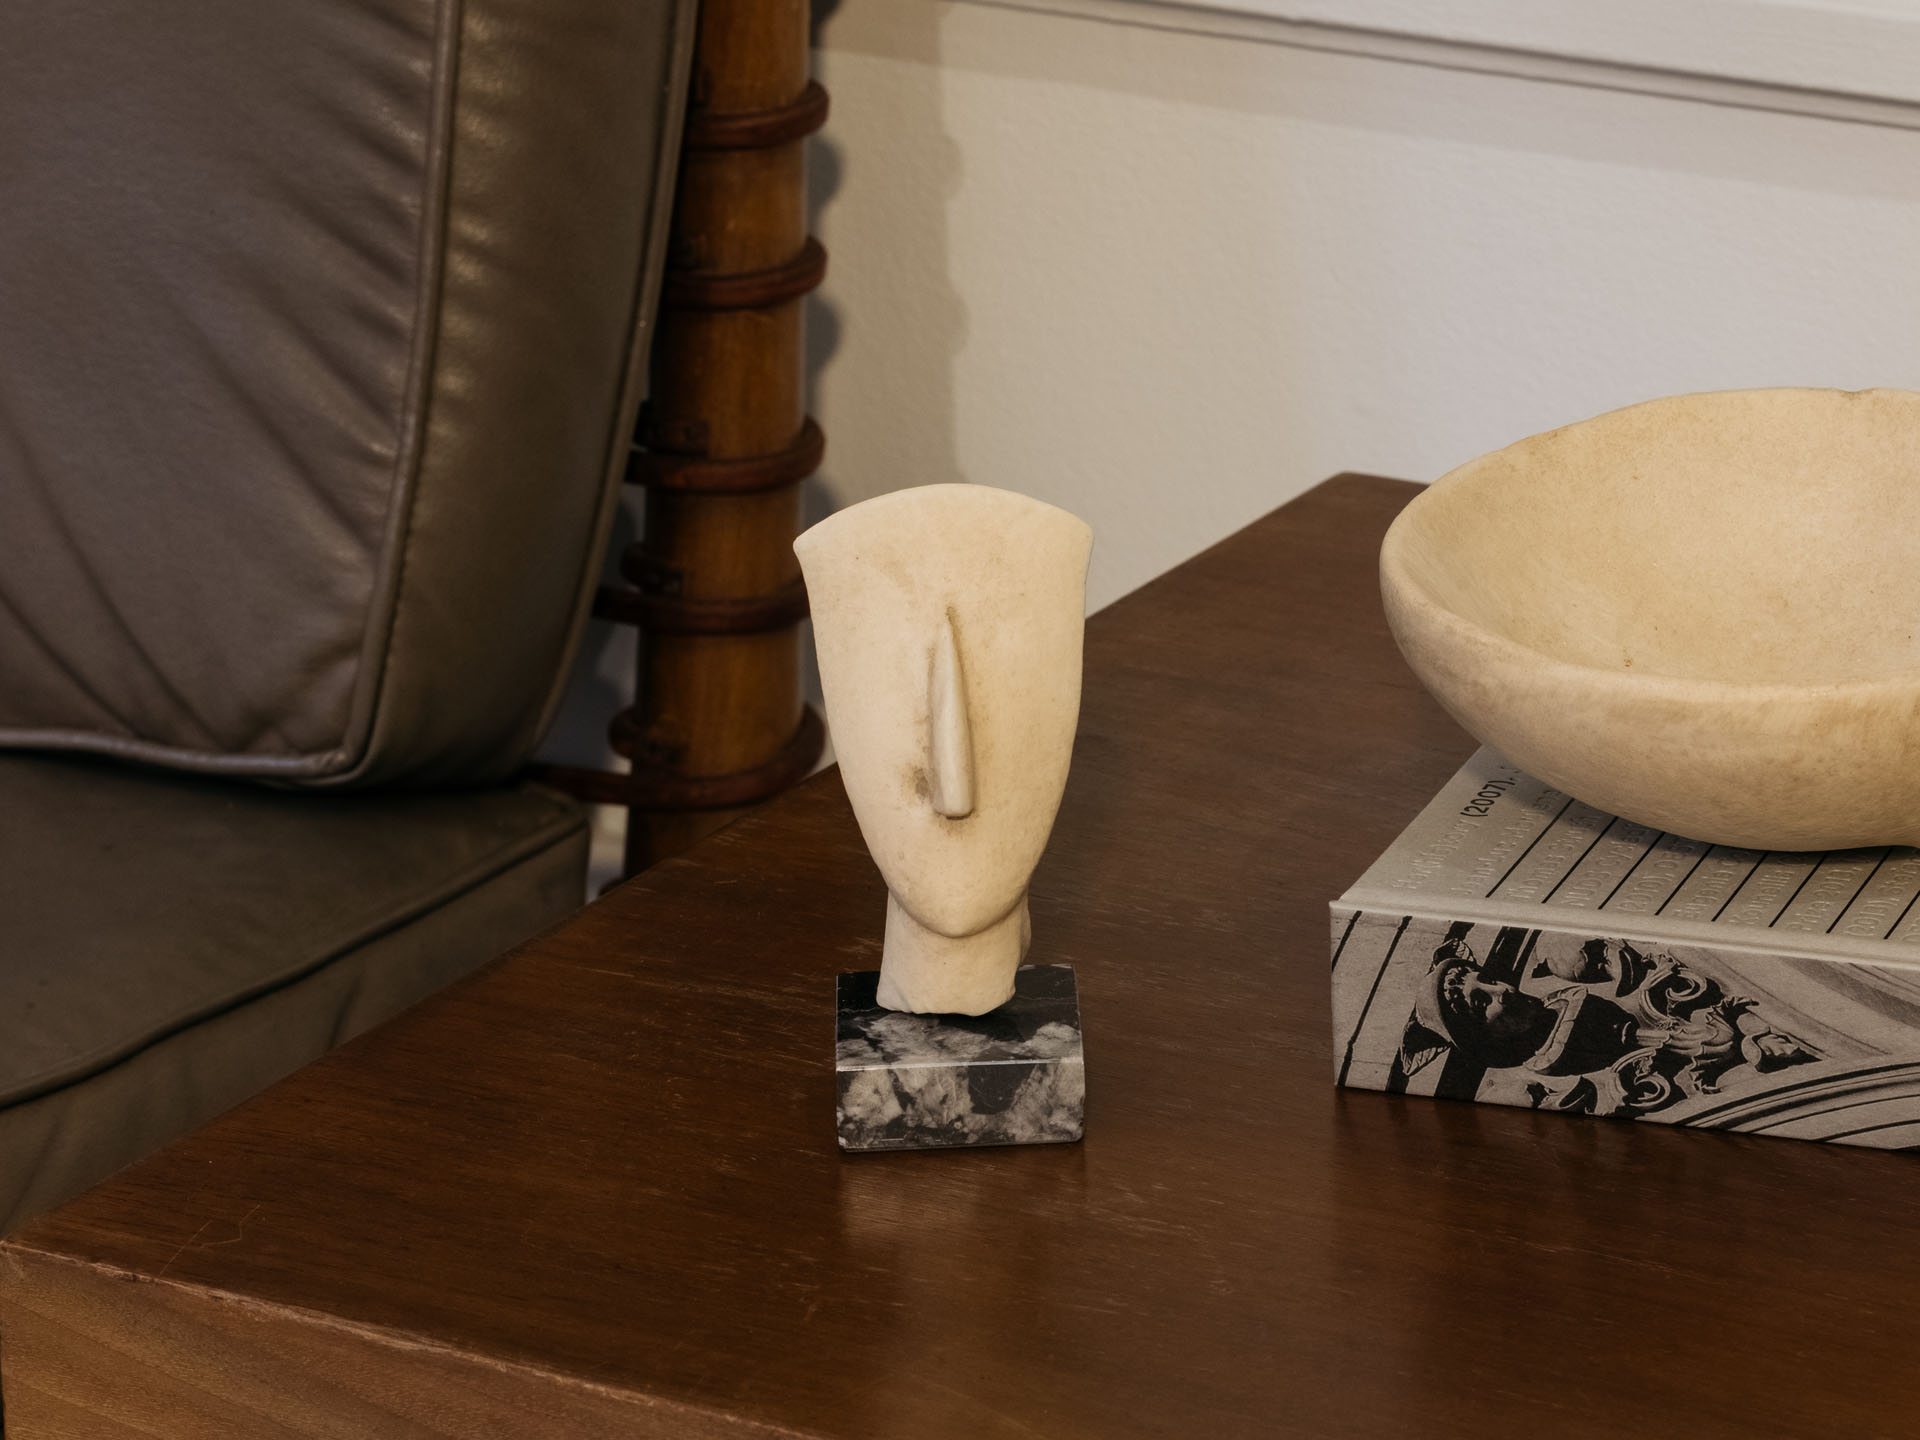 Cycladic head of a figurine made out of resin on a table